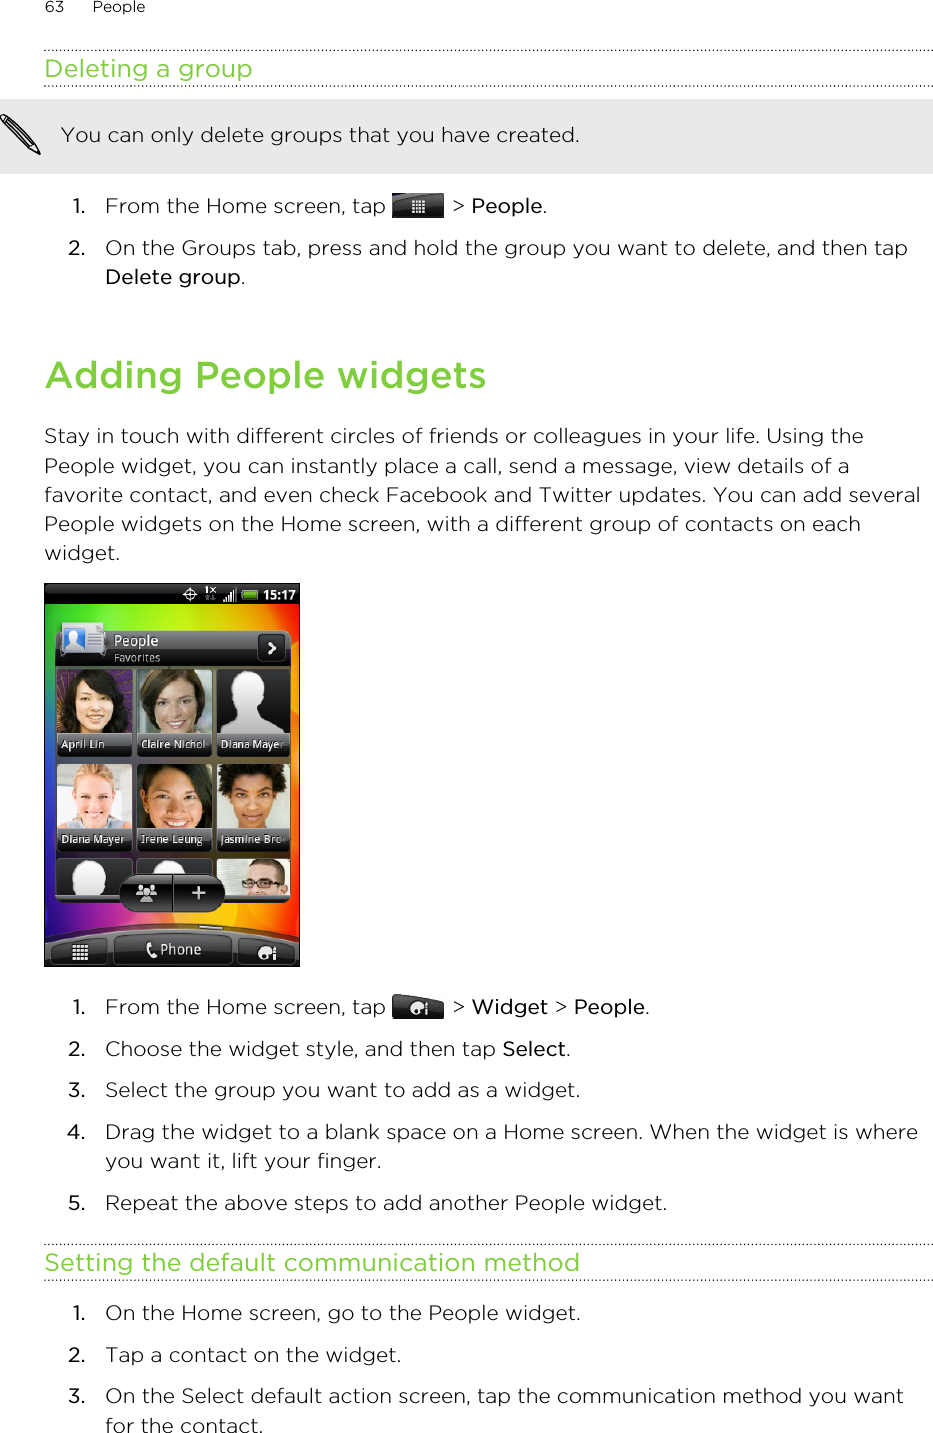 Deleting a groupYou can only delete groups that you have created.1. From the Home screen, tap   &gt; People.2. On the Groups tab, press and hold the group you want to delete, and then tapDelete group.Adding People widgetsStay in touch with different circles of friends or colleagues in your life. Using thePeople widget, you can instantly place a call, send a message, view details of afavorite contact, and even check Facebook and Twitter updates. You can add severalPeople widgets on the Home screen, with a different group of contacts on eachwidget.1. From the Home screen, tap   &gt; Widget &gt; People.2. Choose the widget style, and then tap Select.3. Select the group you want to add as a widget.4. Drag the widget to a blank space on a Home screen. When the widget is whereyou want it, lift your finger.5. Repeat the above steps to add another People widget.Setting the default communication method1. On the Home screen, go to the People widget.2. Tap a contact on the widget.3. On the Select default action screen, tap the communication method you wantfor the contact.63 People